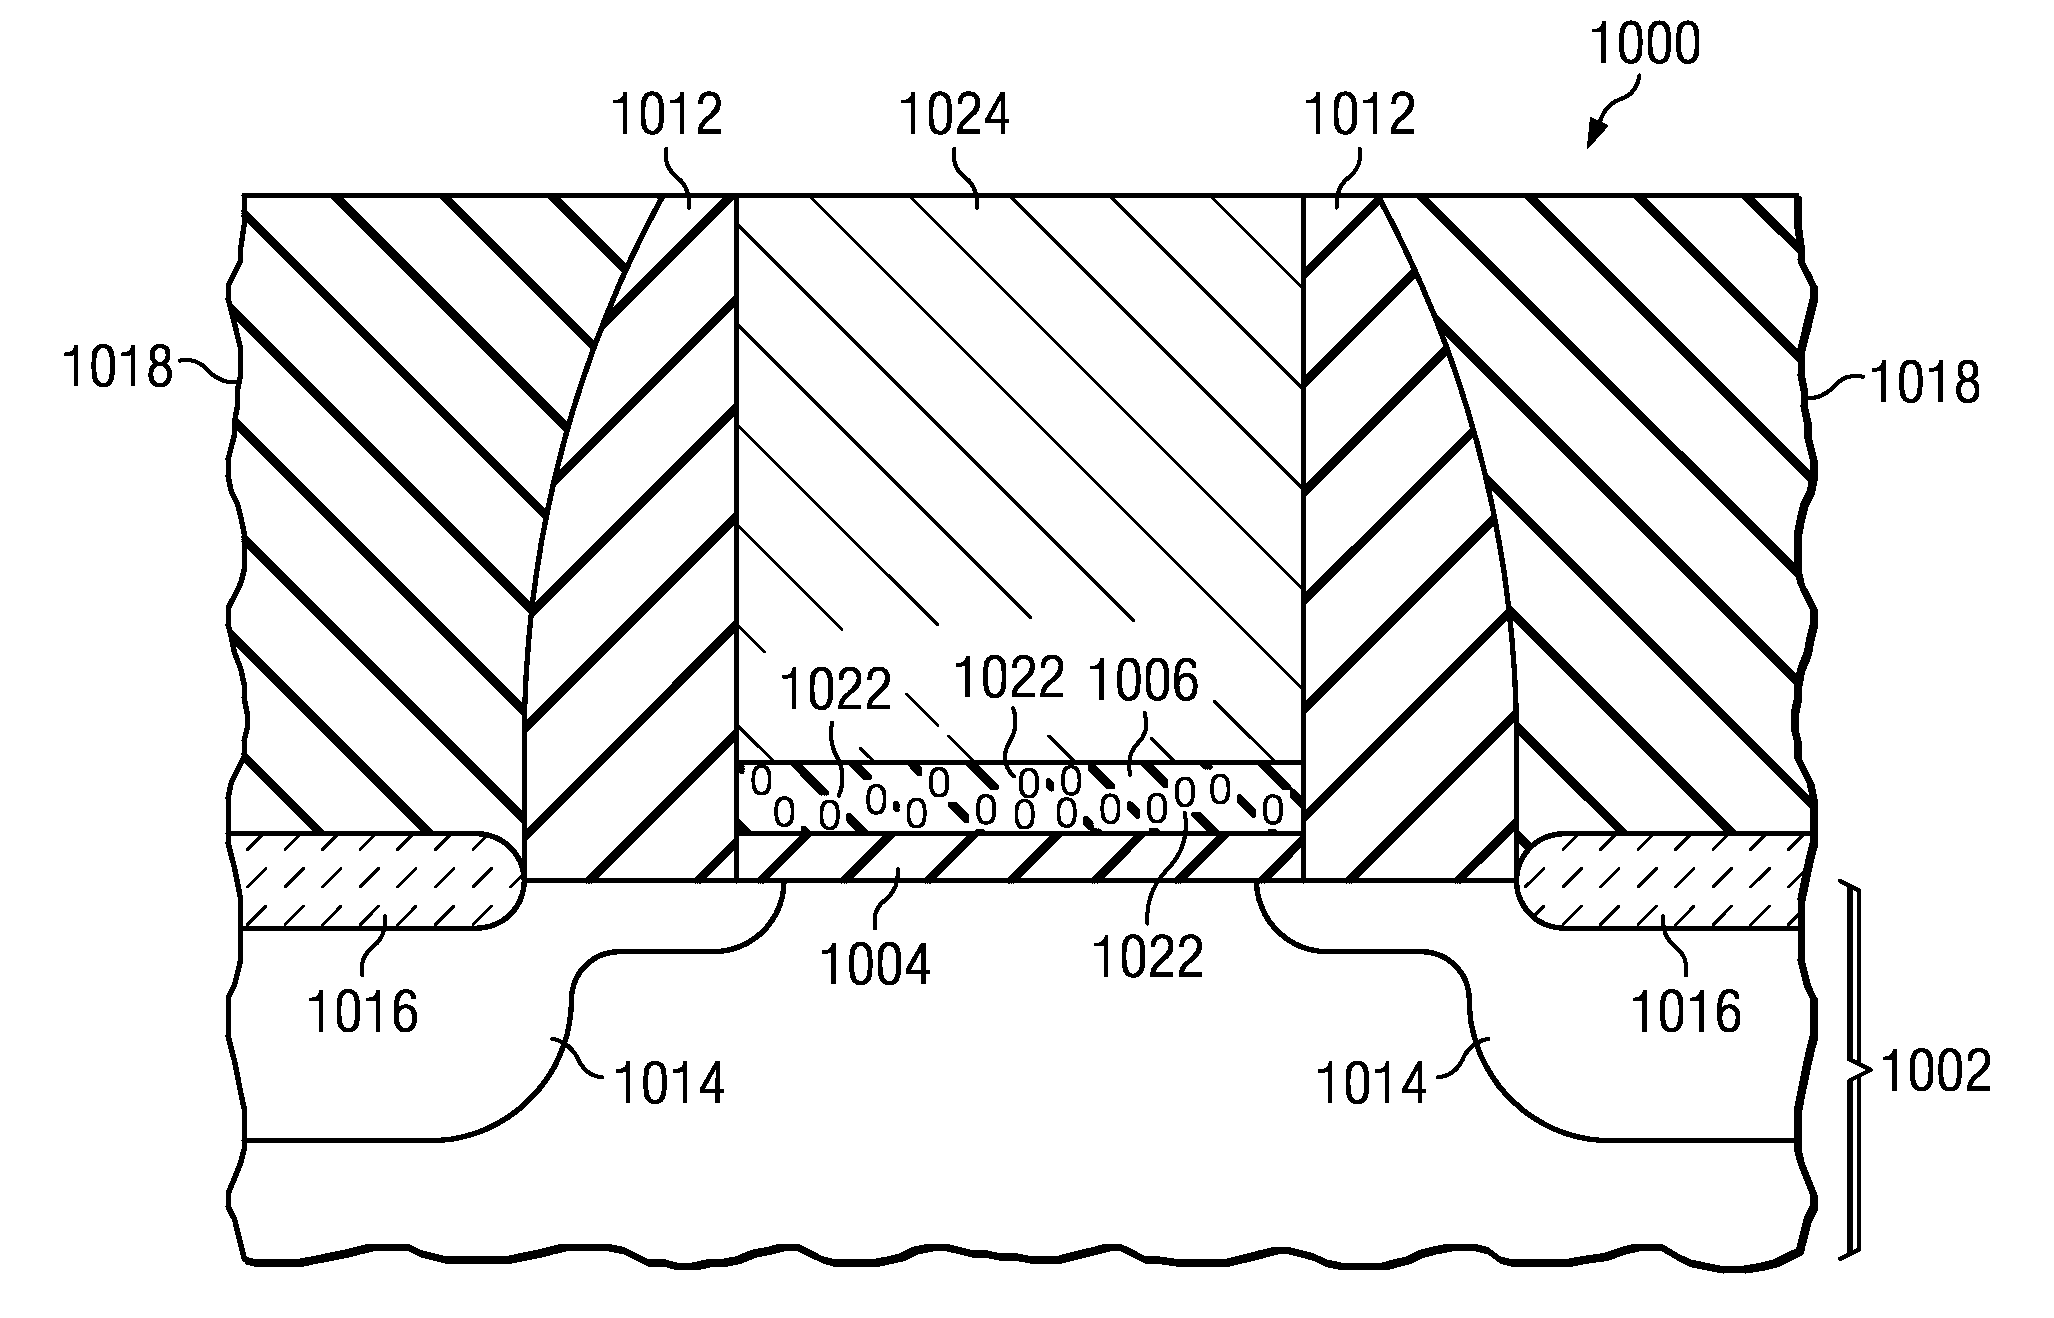 Methods to enhance effective work function of mid-gap metal by incorporating oxygen and hydrogen at a low thermal budget